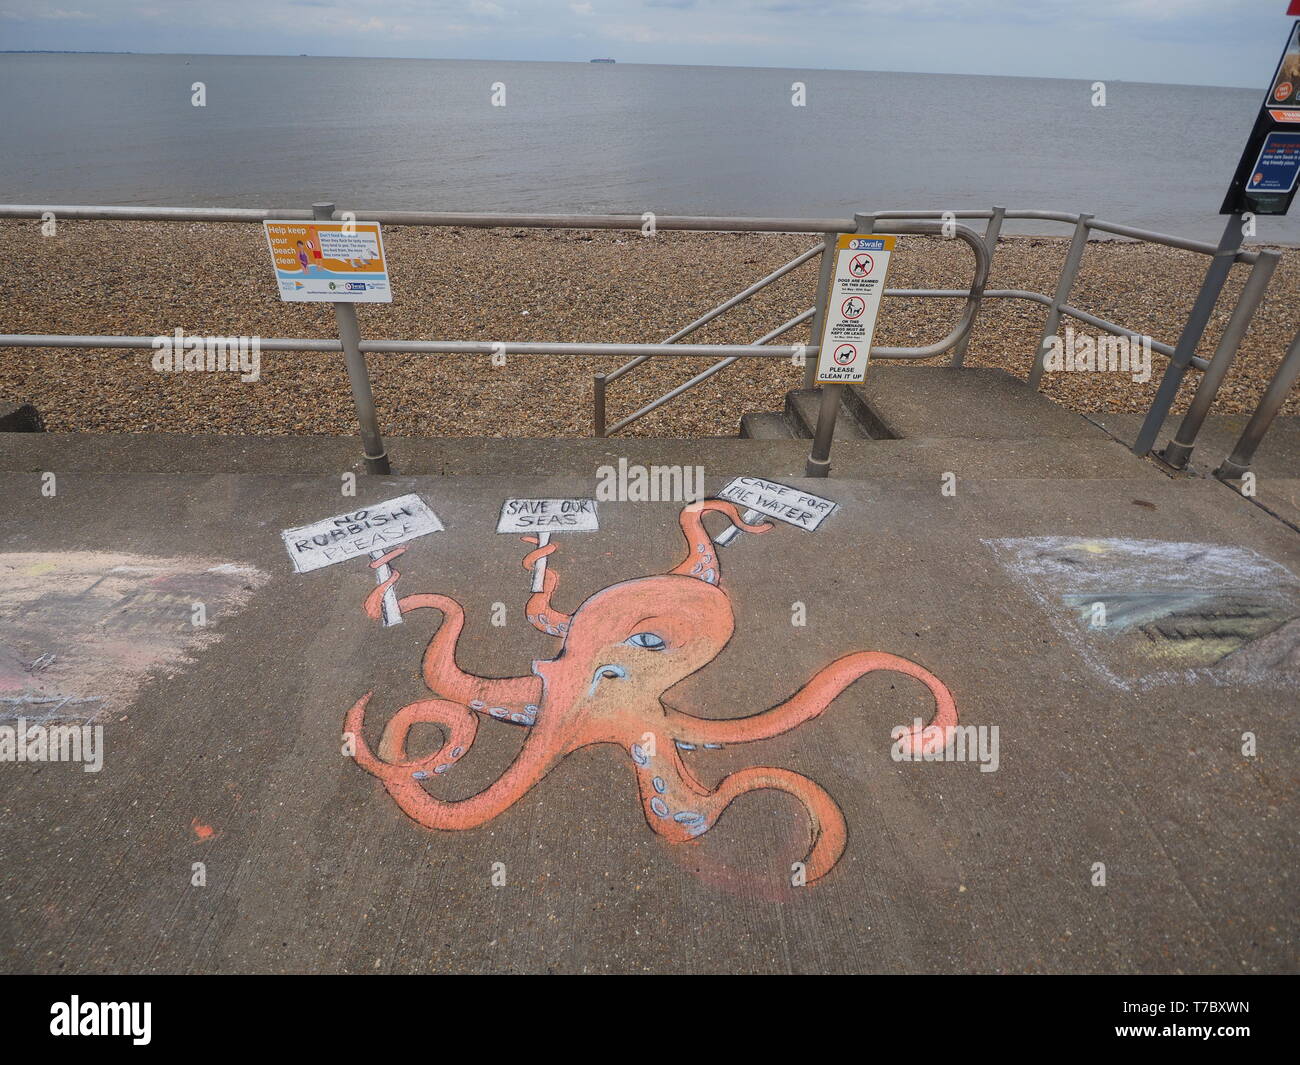 Minster on Sea, Kent, UK. 6th May, 2019. UK Weather: a cloudy afternoon in Minster on Sea, Kent, with rain threatening to wash away chalk art works from the re-run Chalk Marks event earlier today - local artists created chalk artworks with a seaside theme as part of an event organised by Squarecube Artisans. Credit: James Bell/Alamy Live News Stock Photo